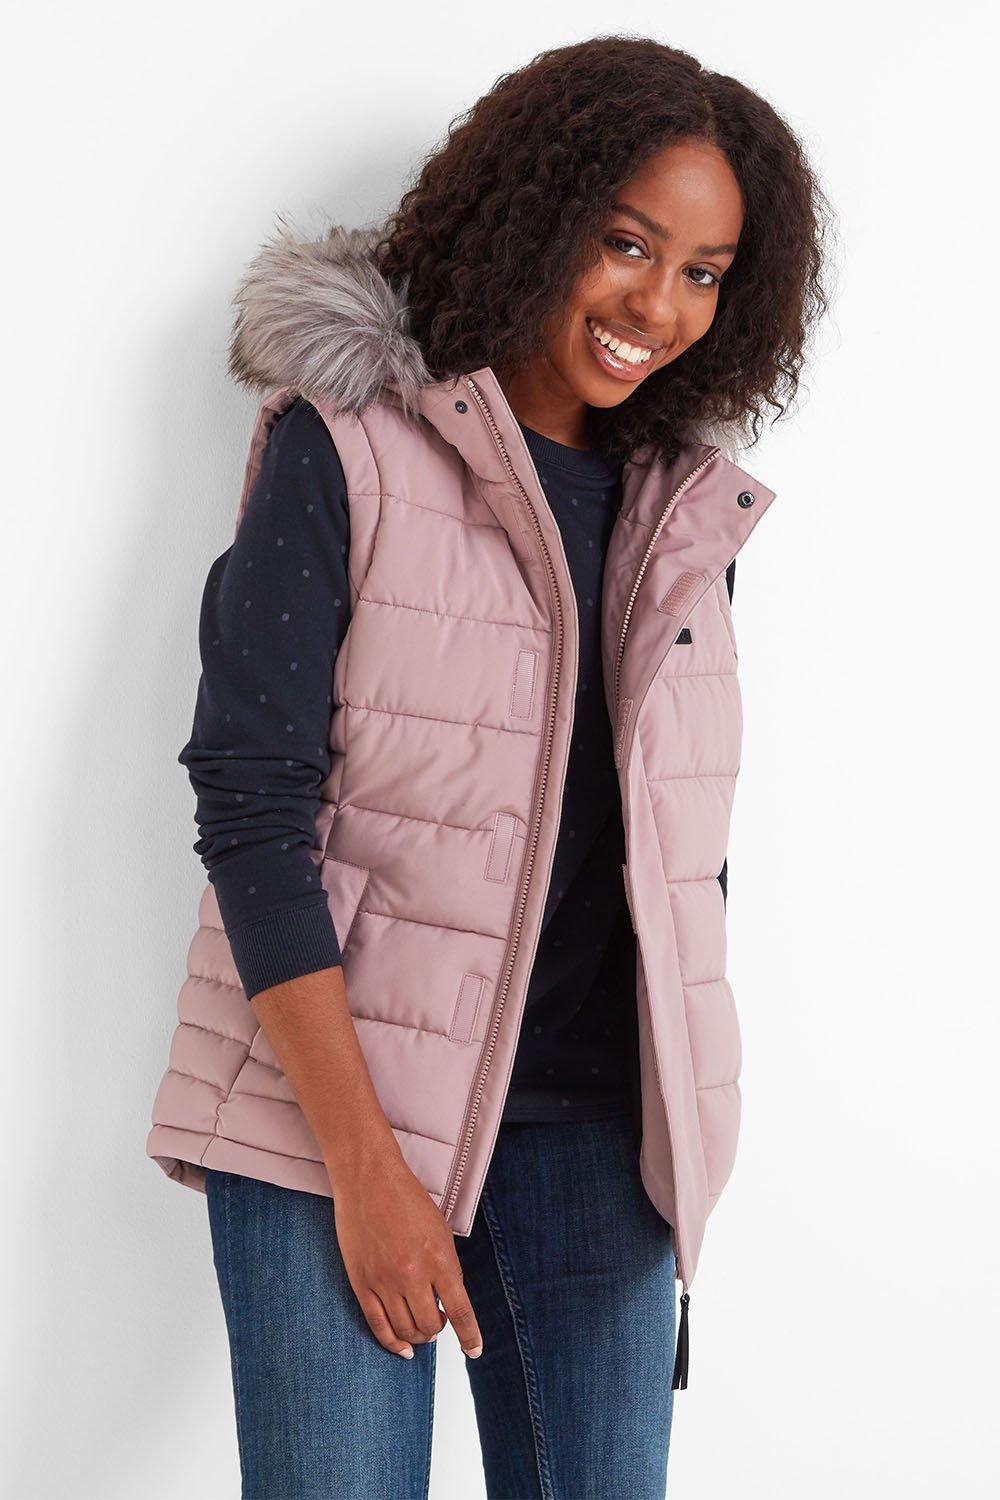 TOG 24 Cowling Womens Ultra Warm Wind Resistant Padded Gilet with Pockets and Faux Fur Trim Hood